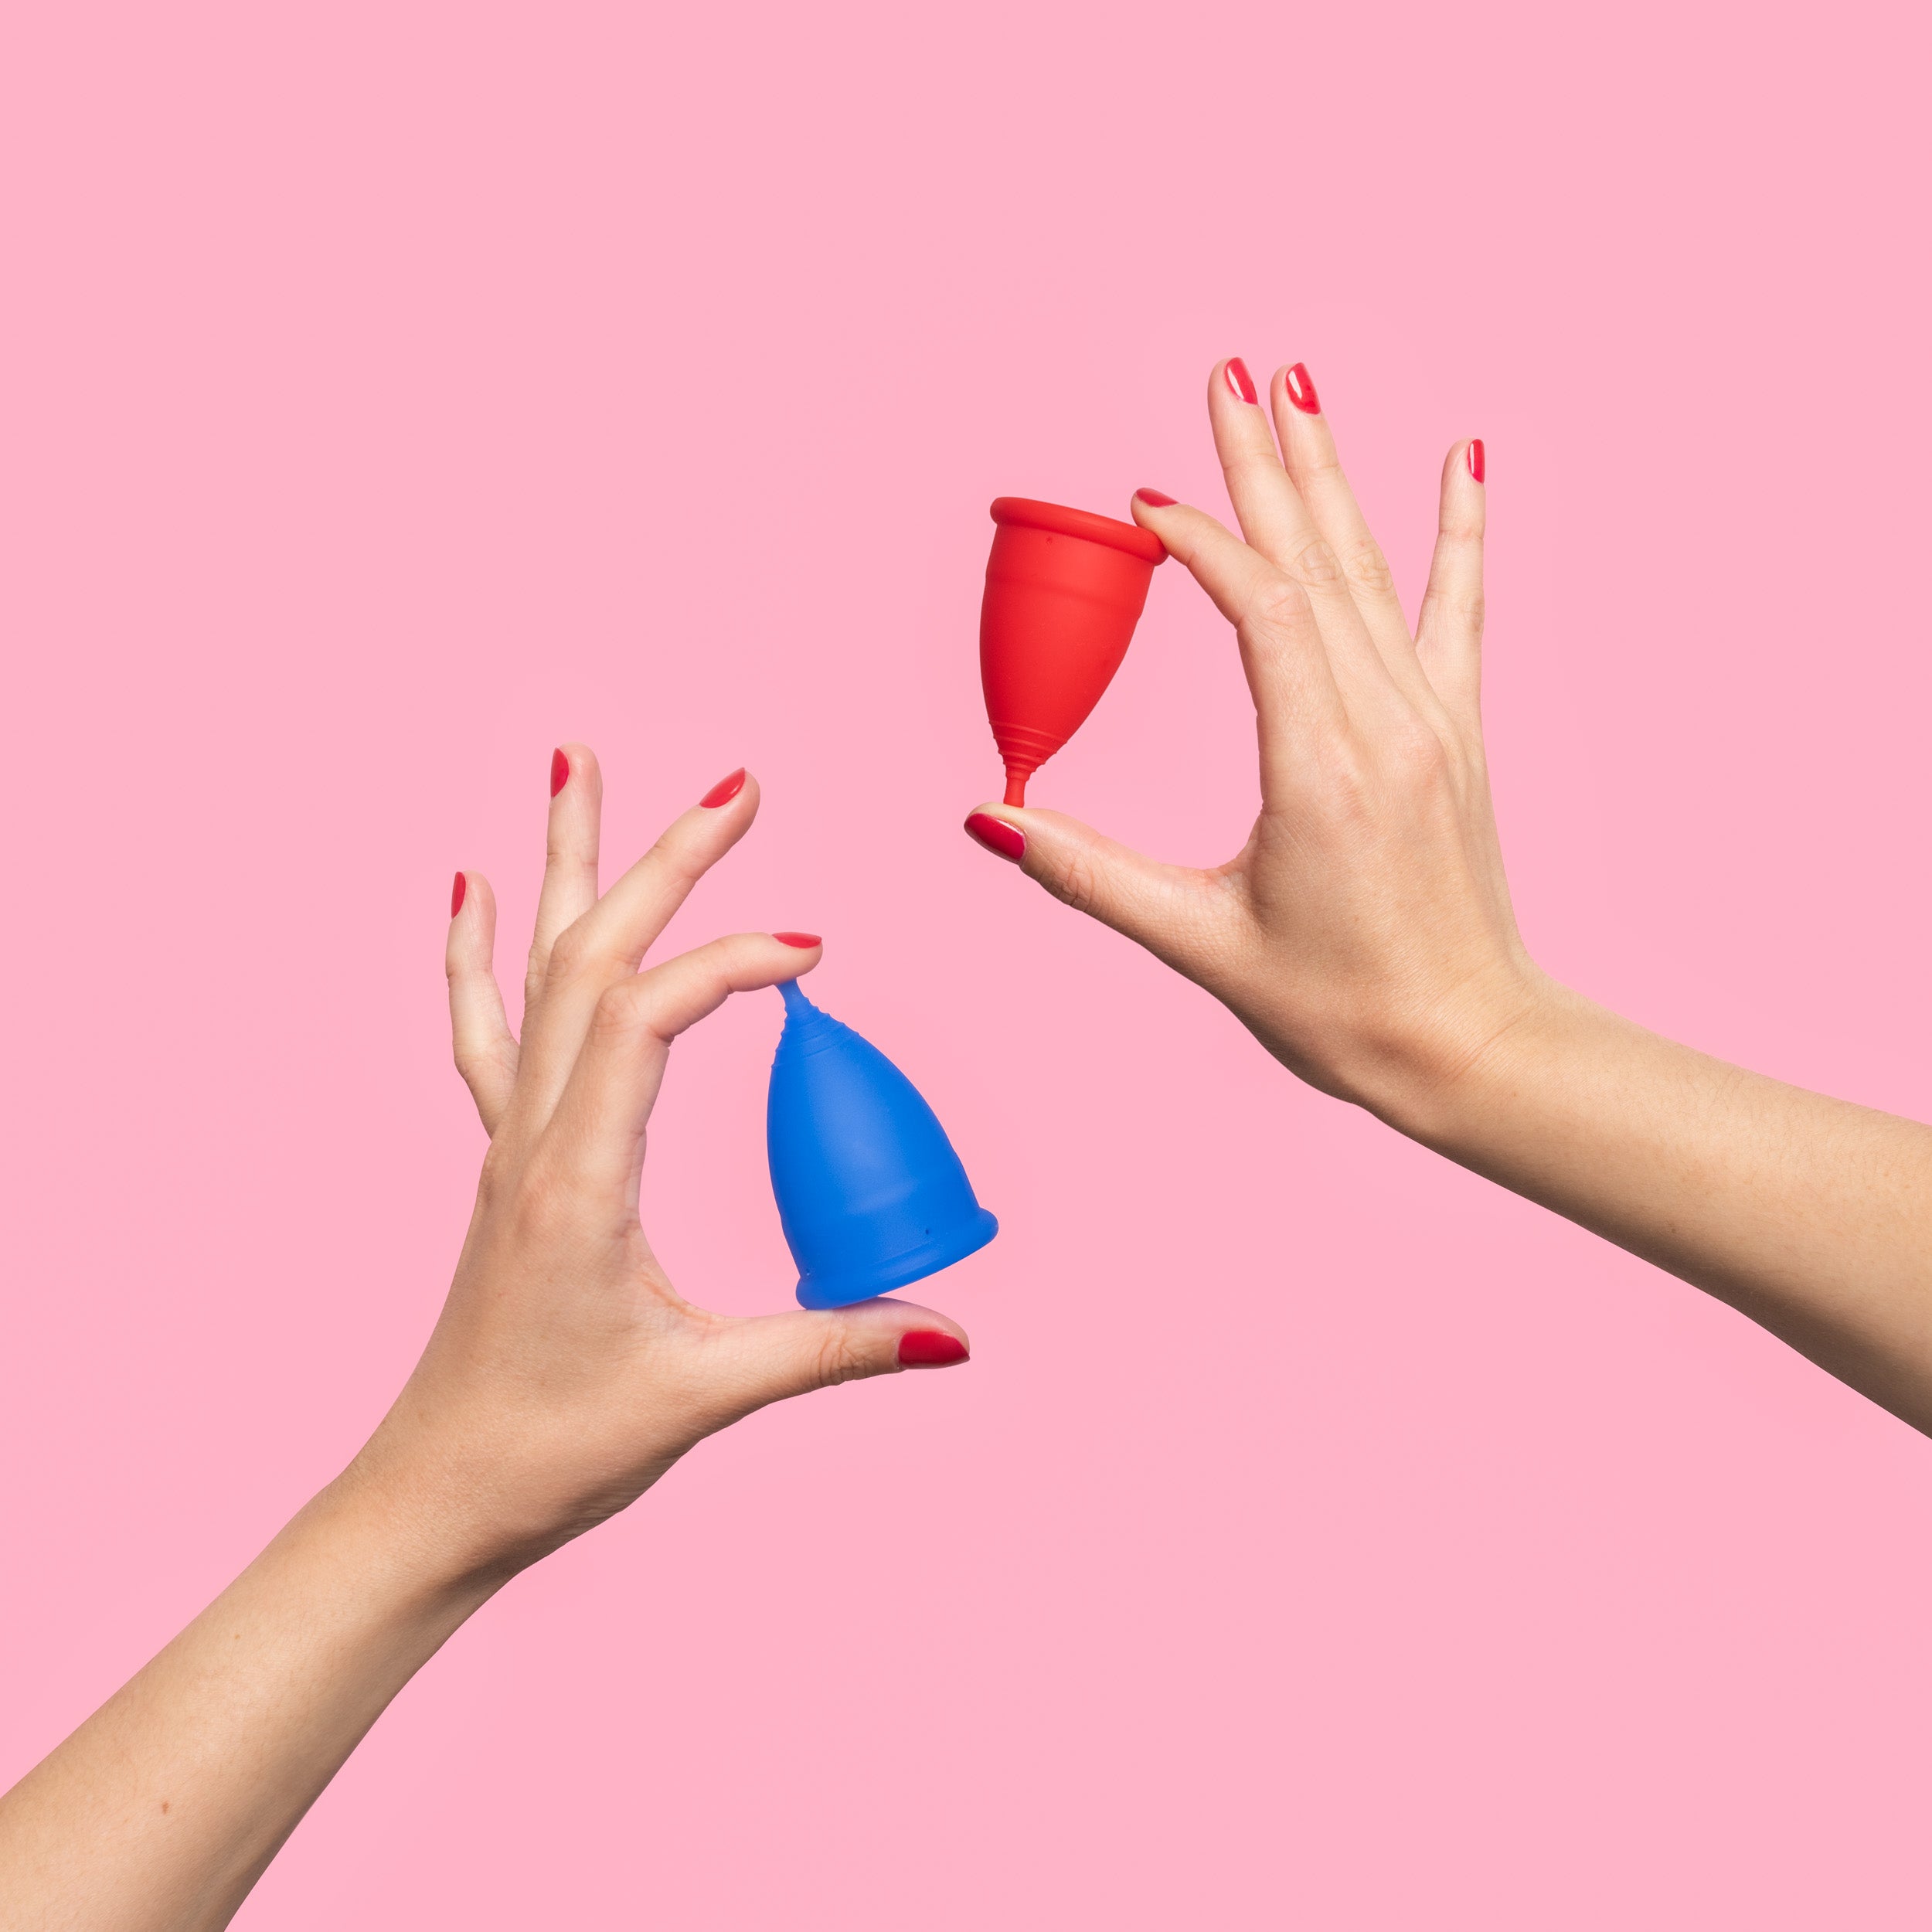 Menstrual Cup stuck? Easy step-by-step removal tips and tricks Moxie